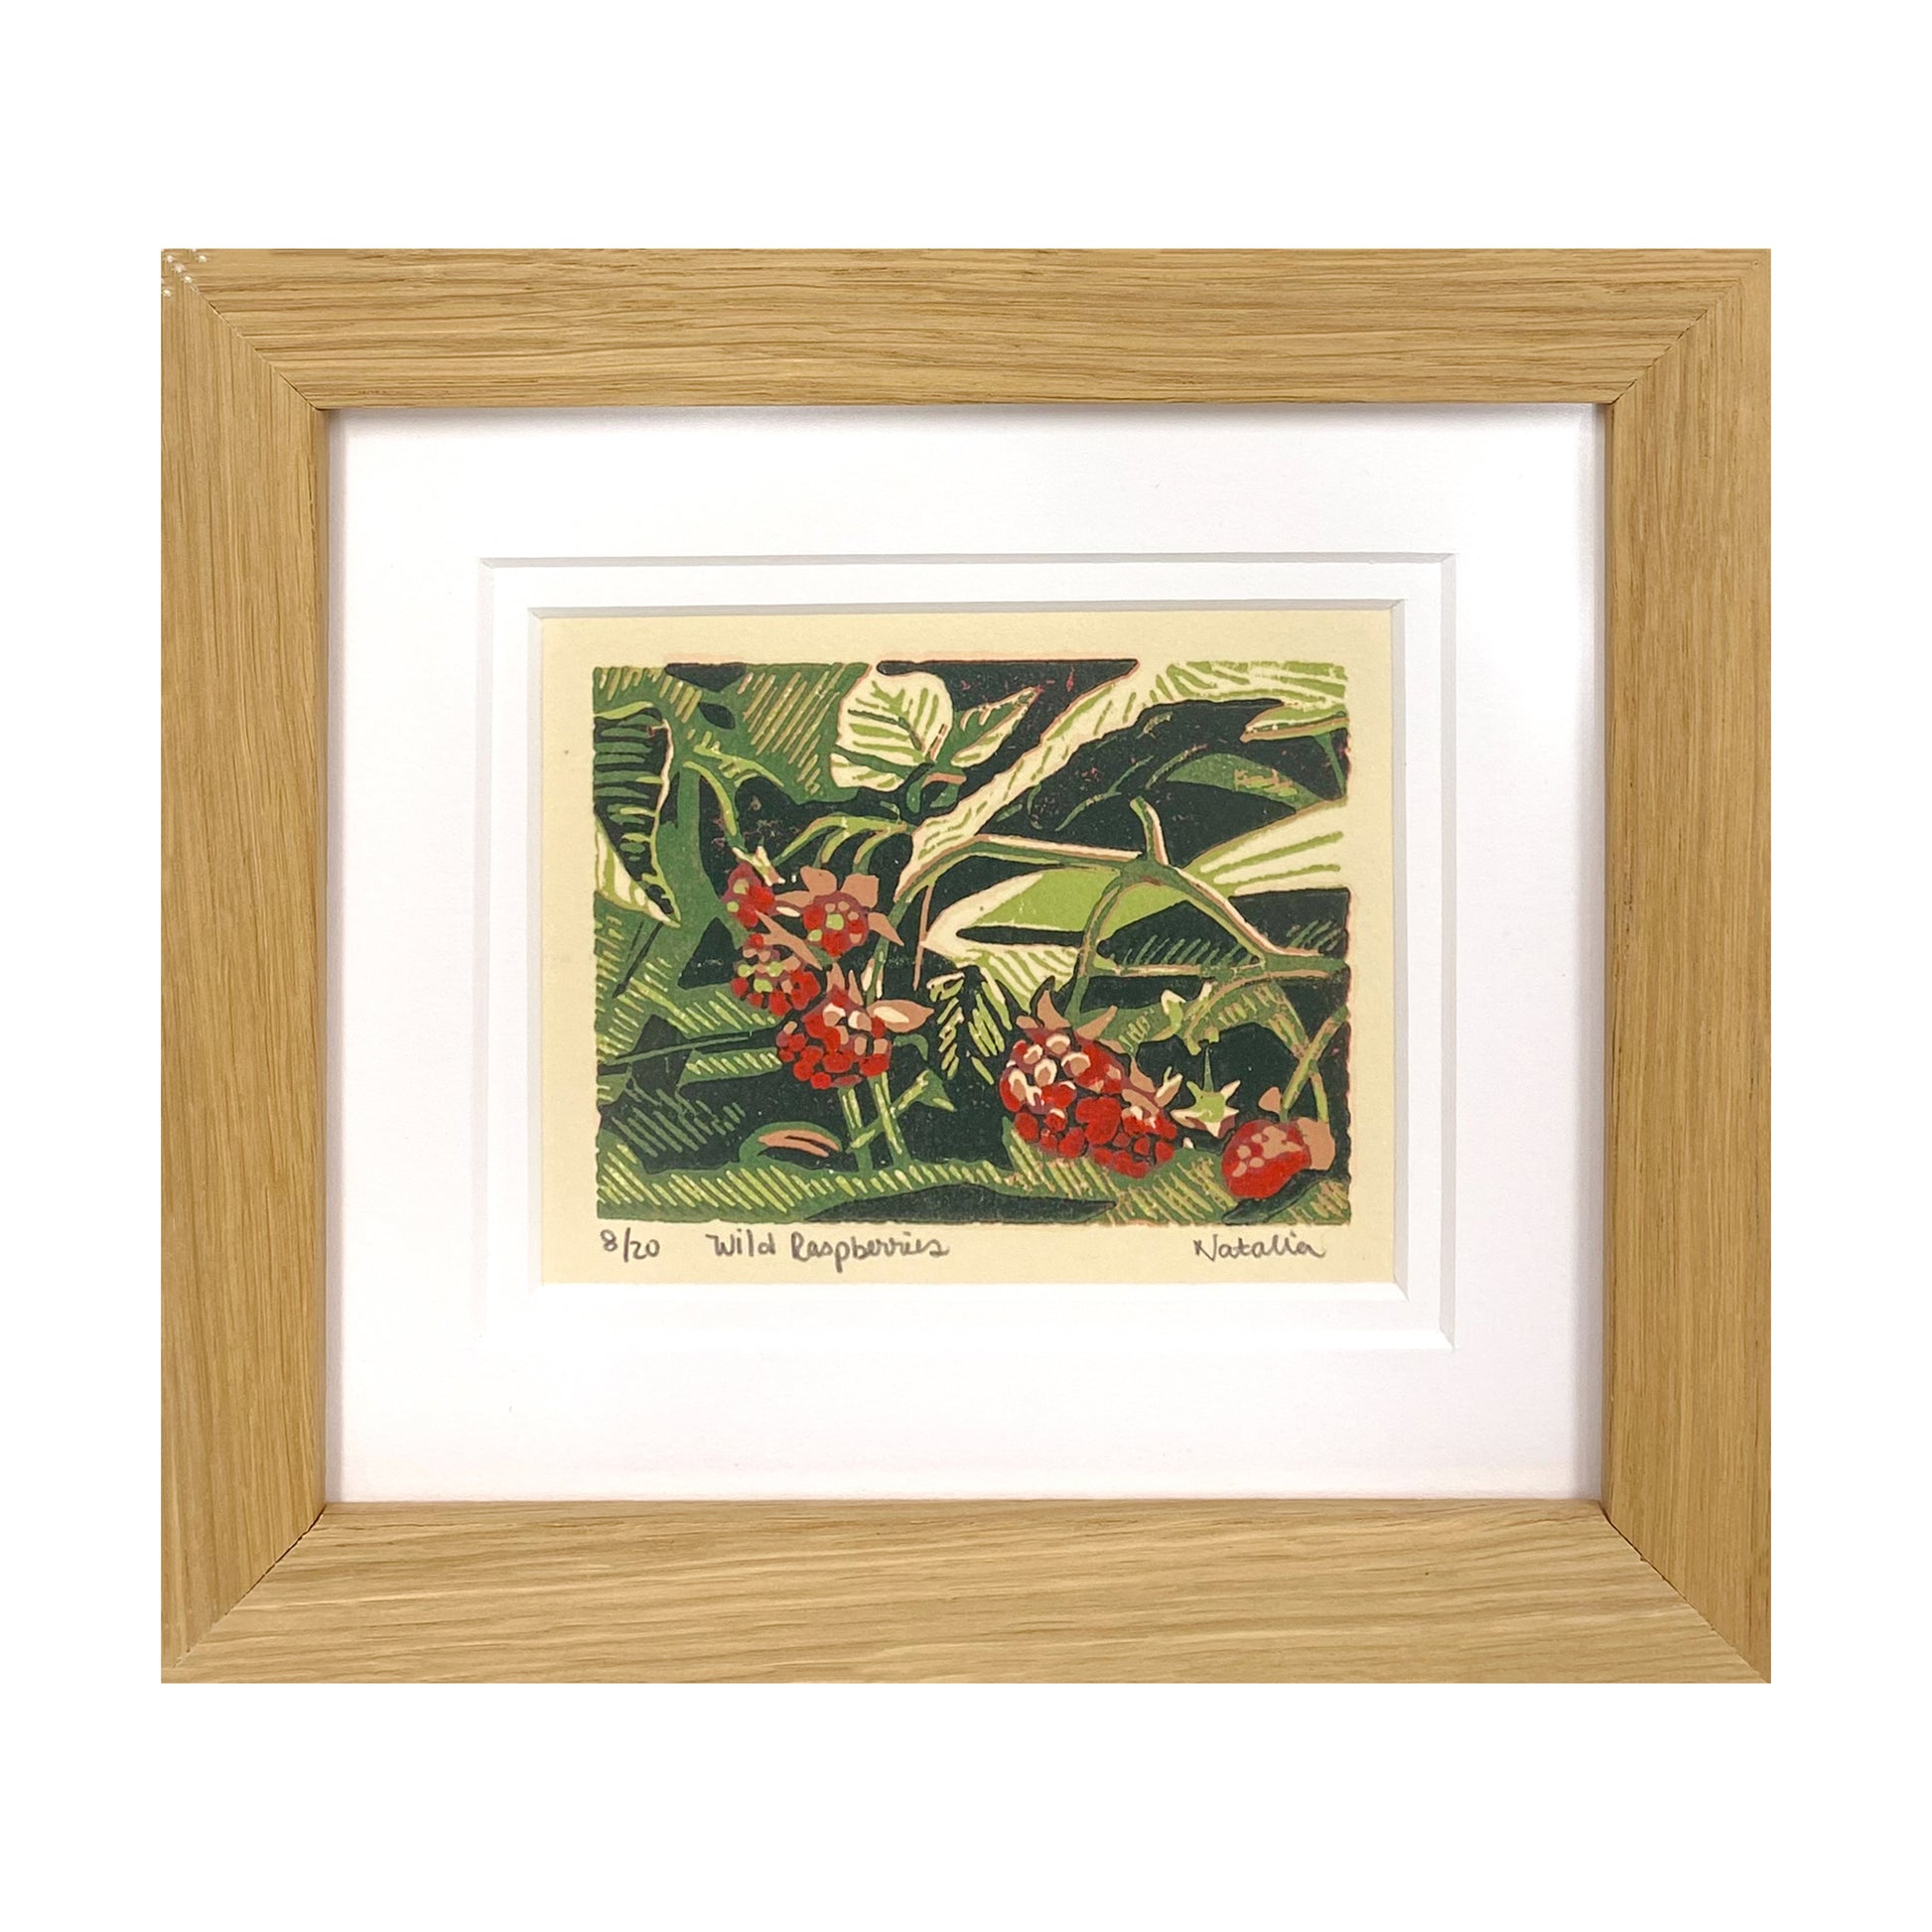 Wild Raspberries.  A signed, original reduction multi-color block print carved and printed in Michigan by Natalia Wohletz of Peninsula Prints.